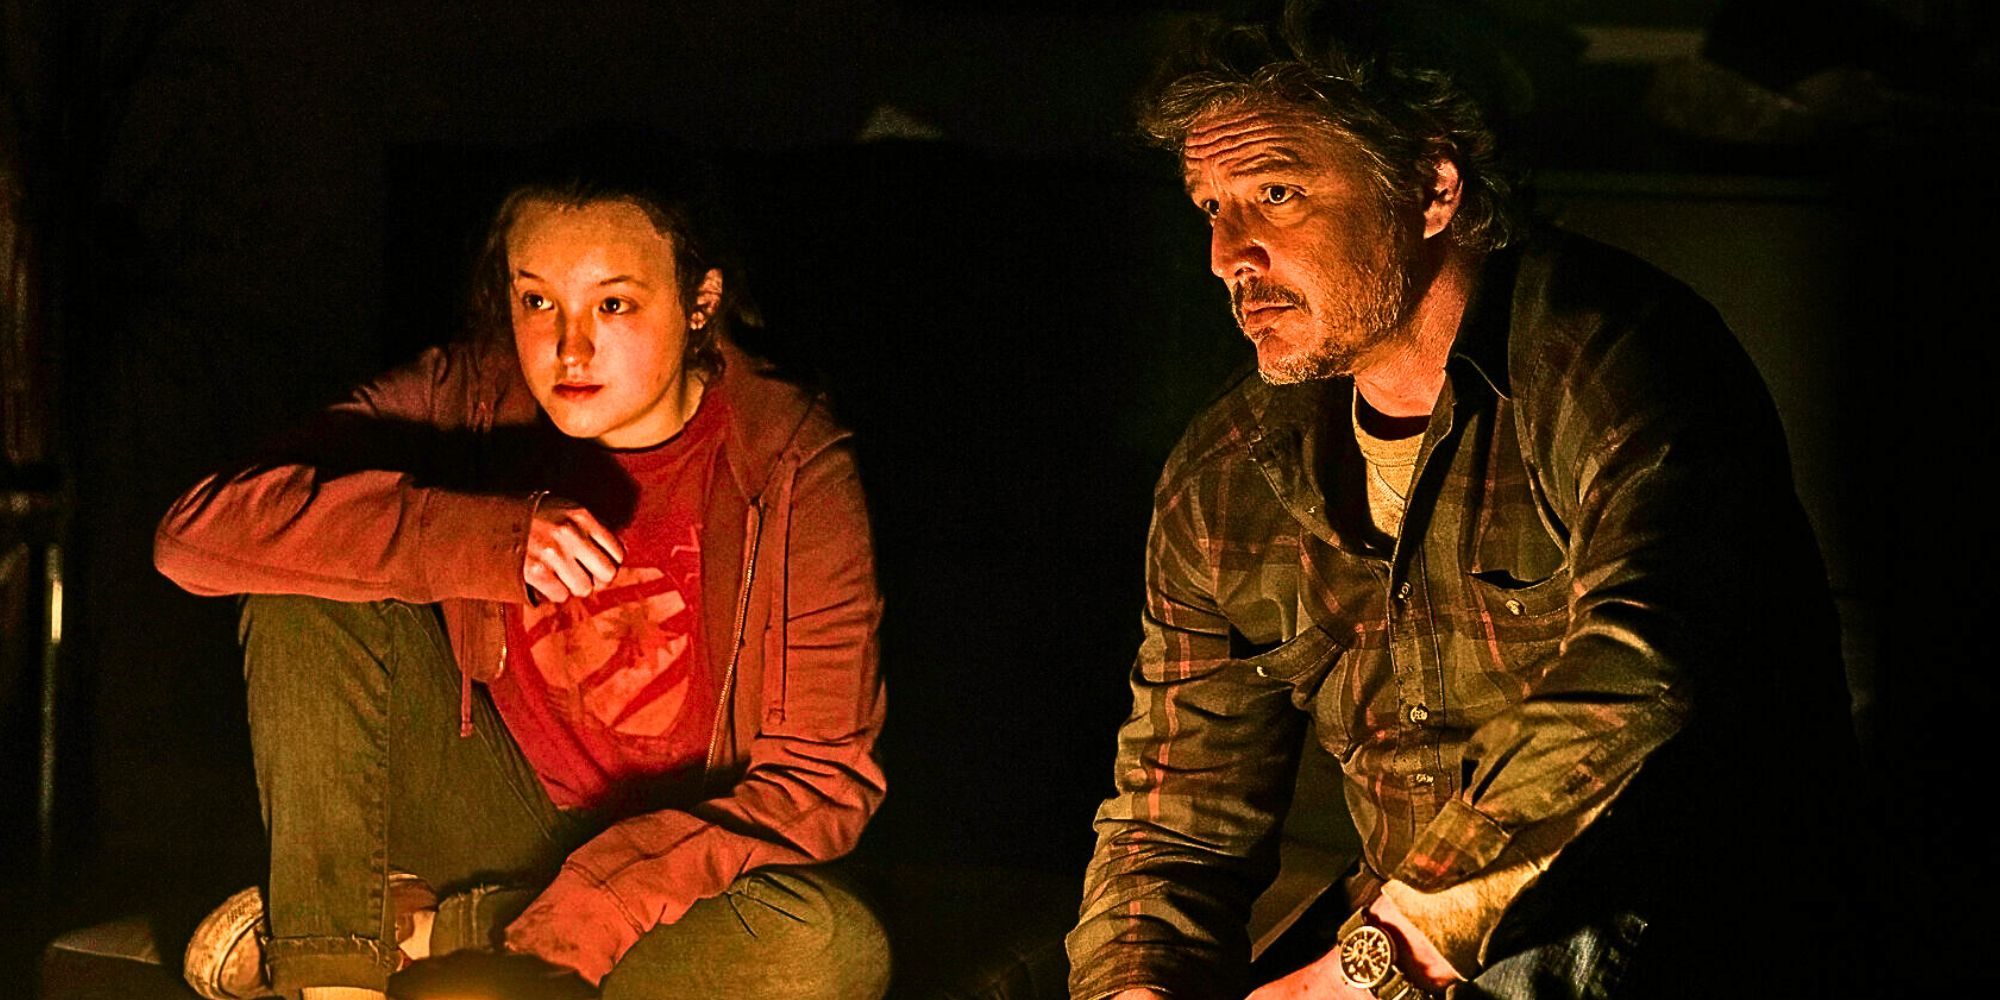 Bella Ramsey as Ellie and Pedro Pascal as Joel looking concerned in The Last of Us